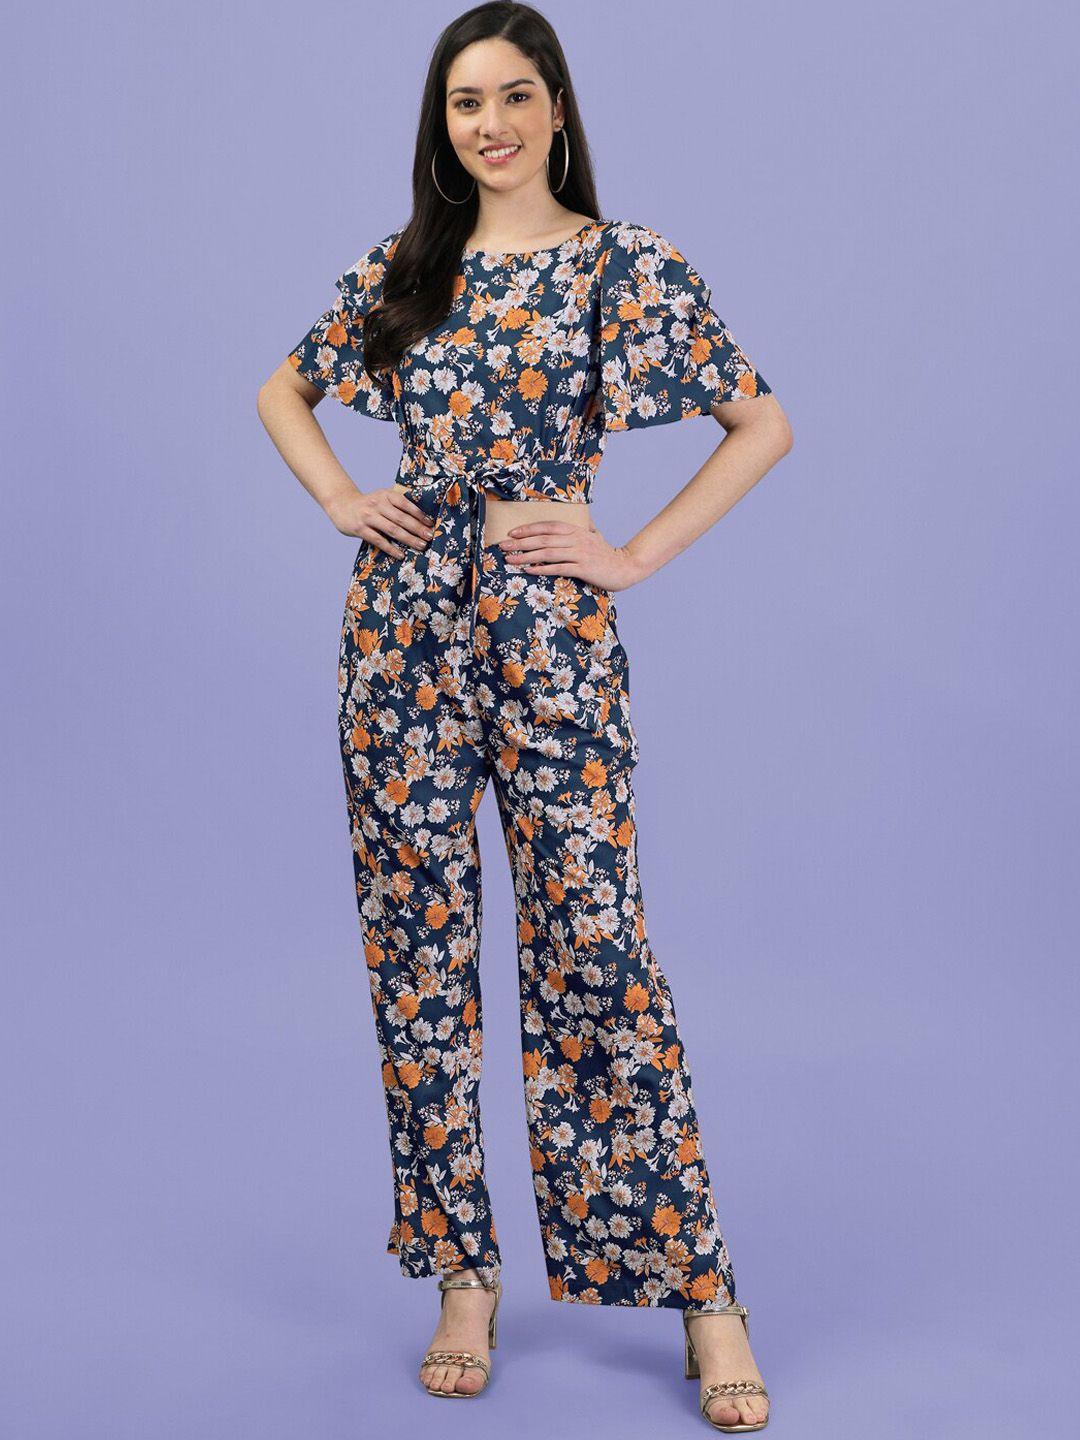 masakali.co women floral printed co-ords